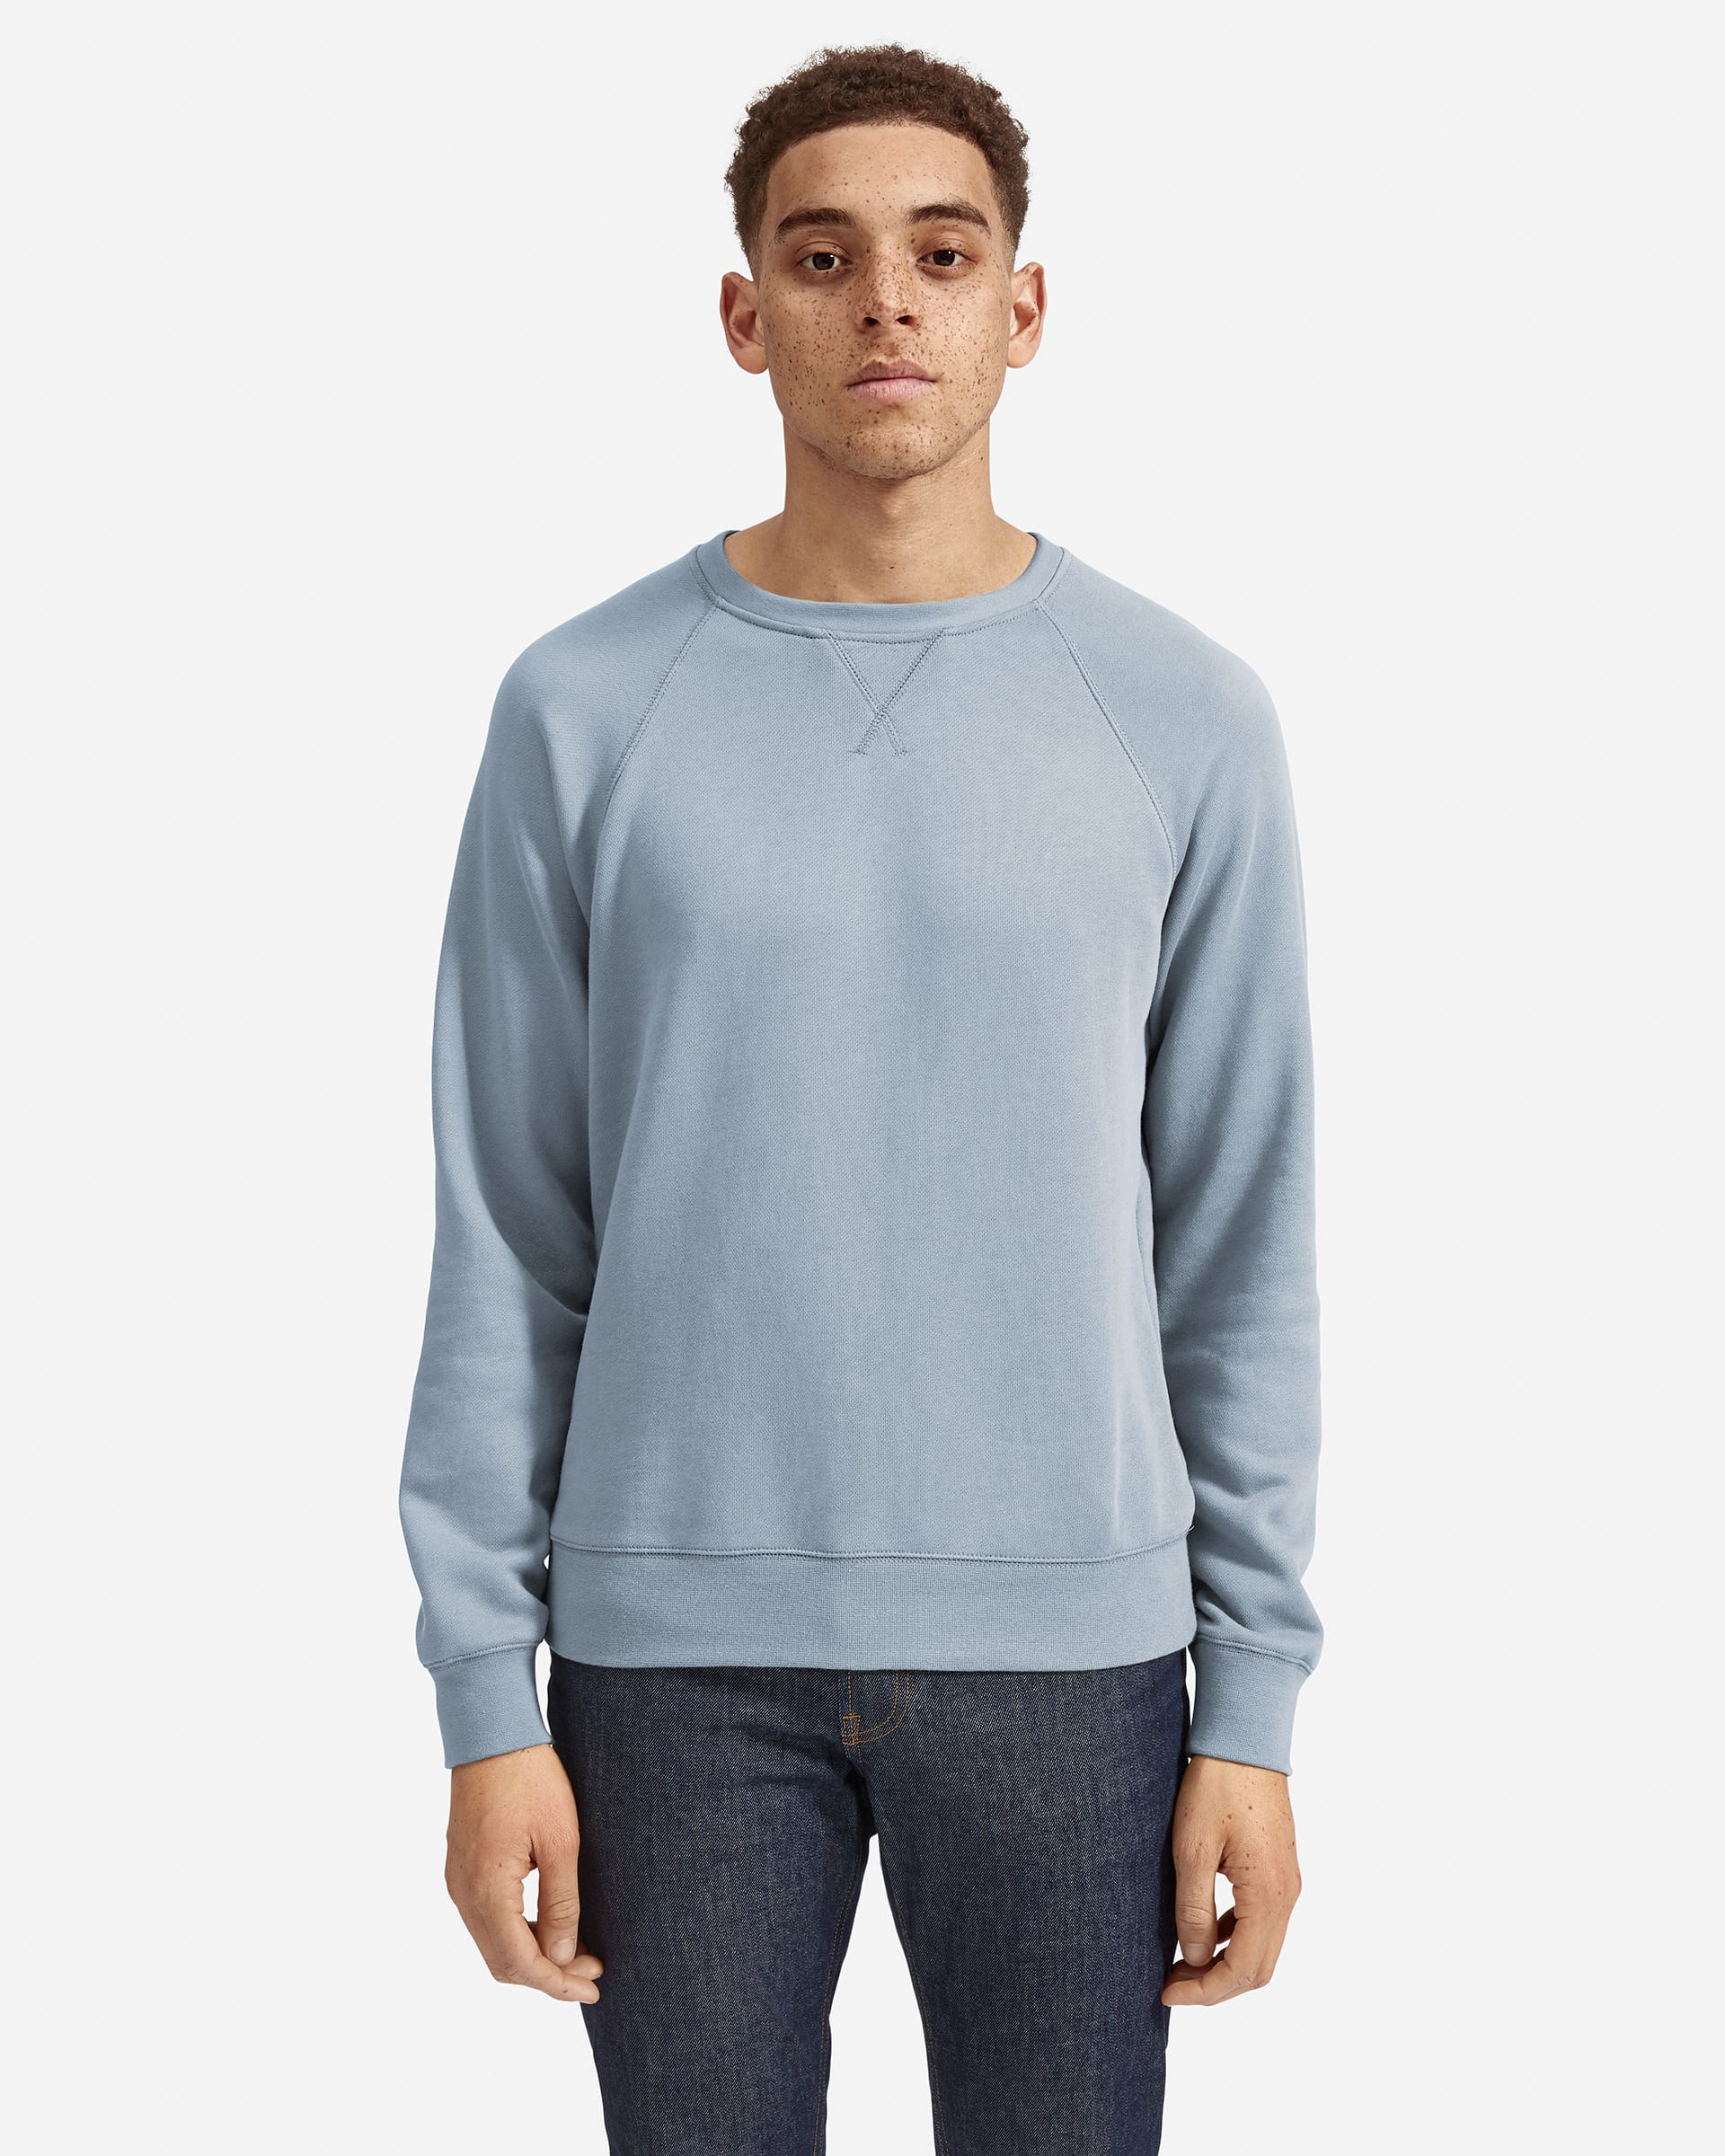 The Lightweight French Terry Crew Pale Blue – Everlane